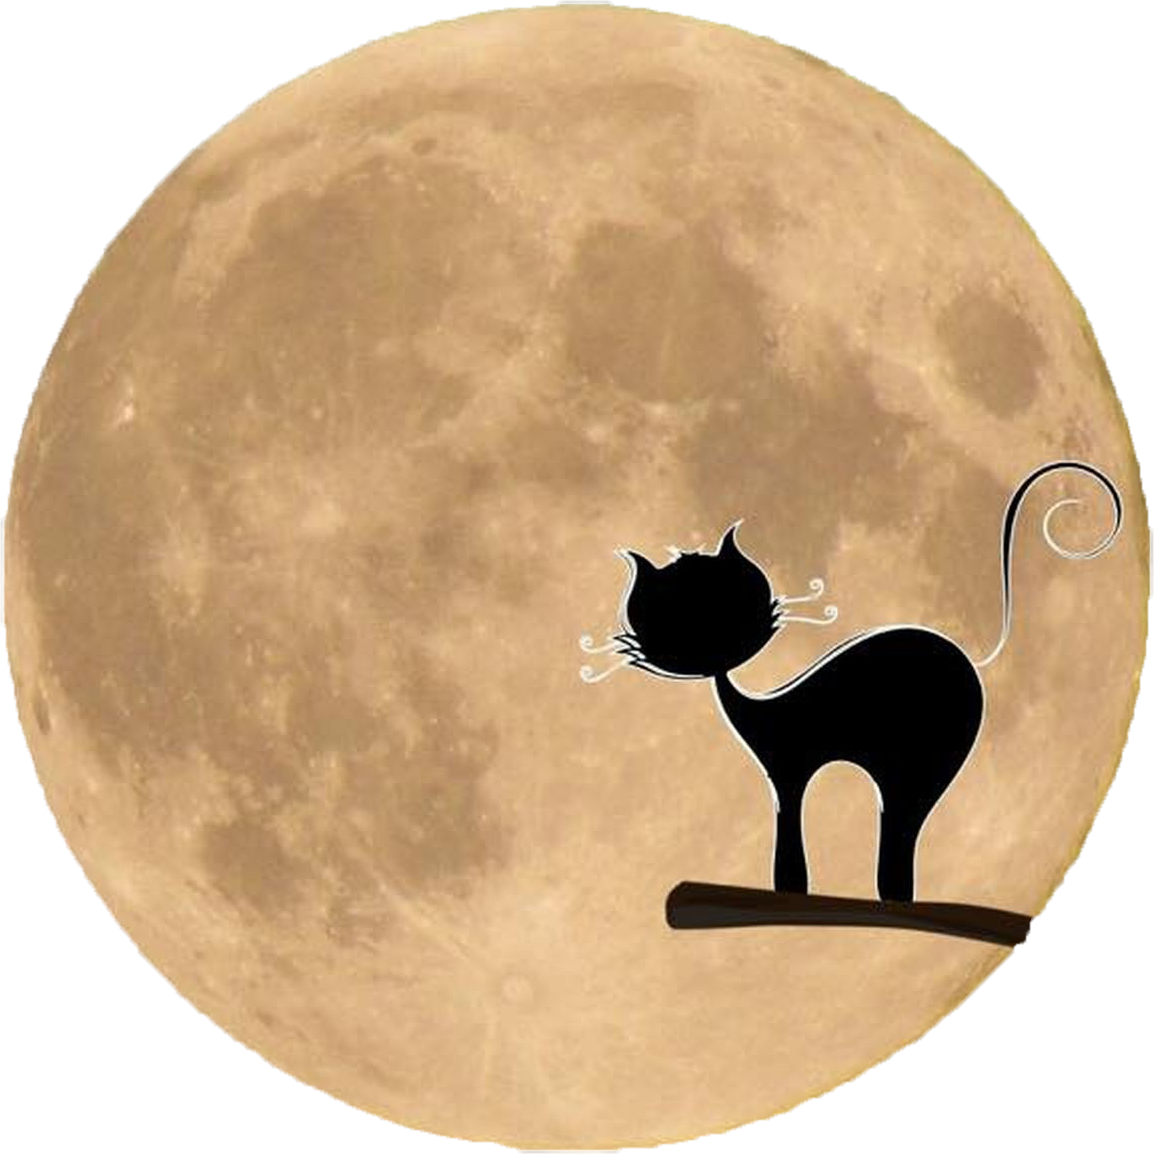 Free black cat silhouette. Moon clipart transparent background